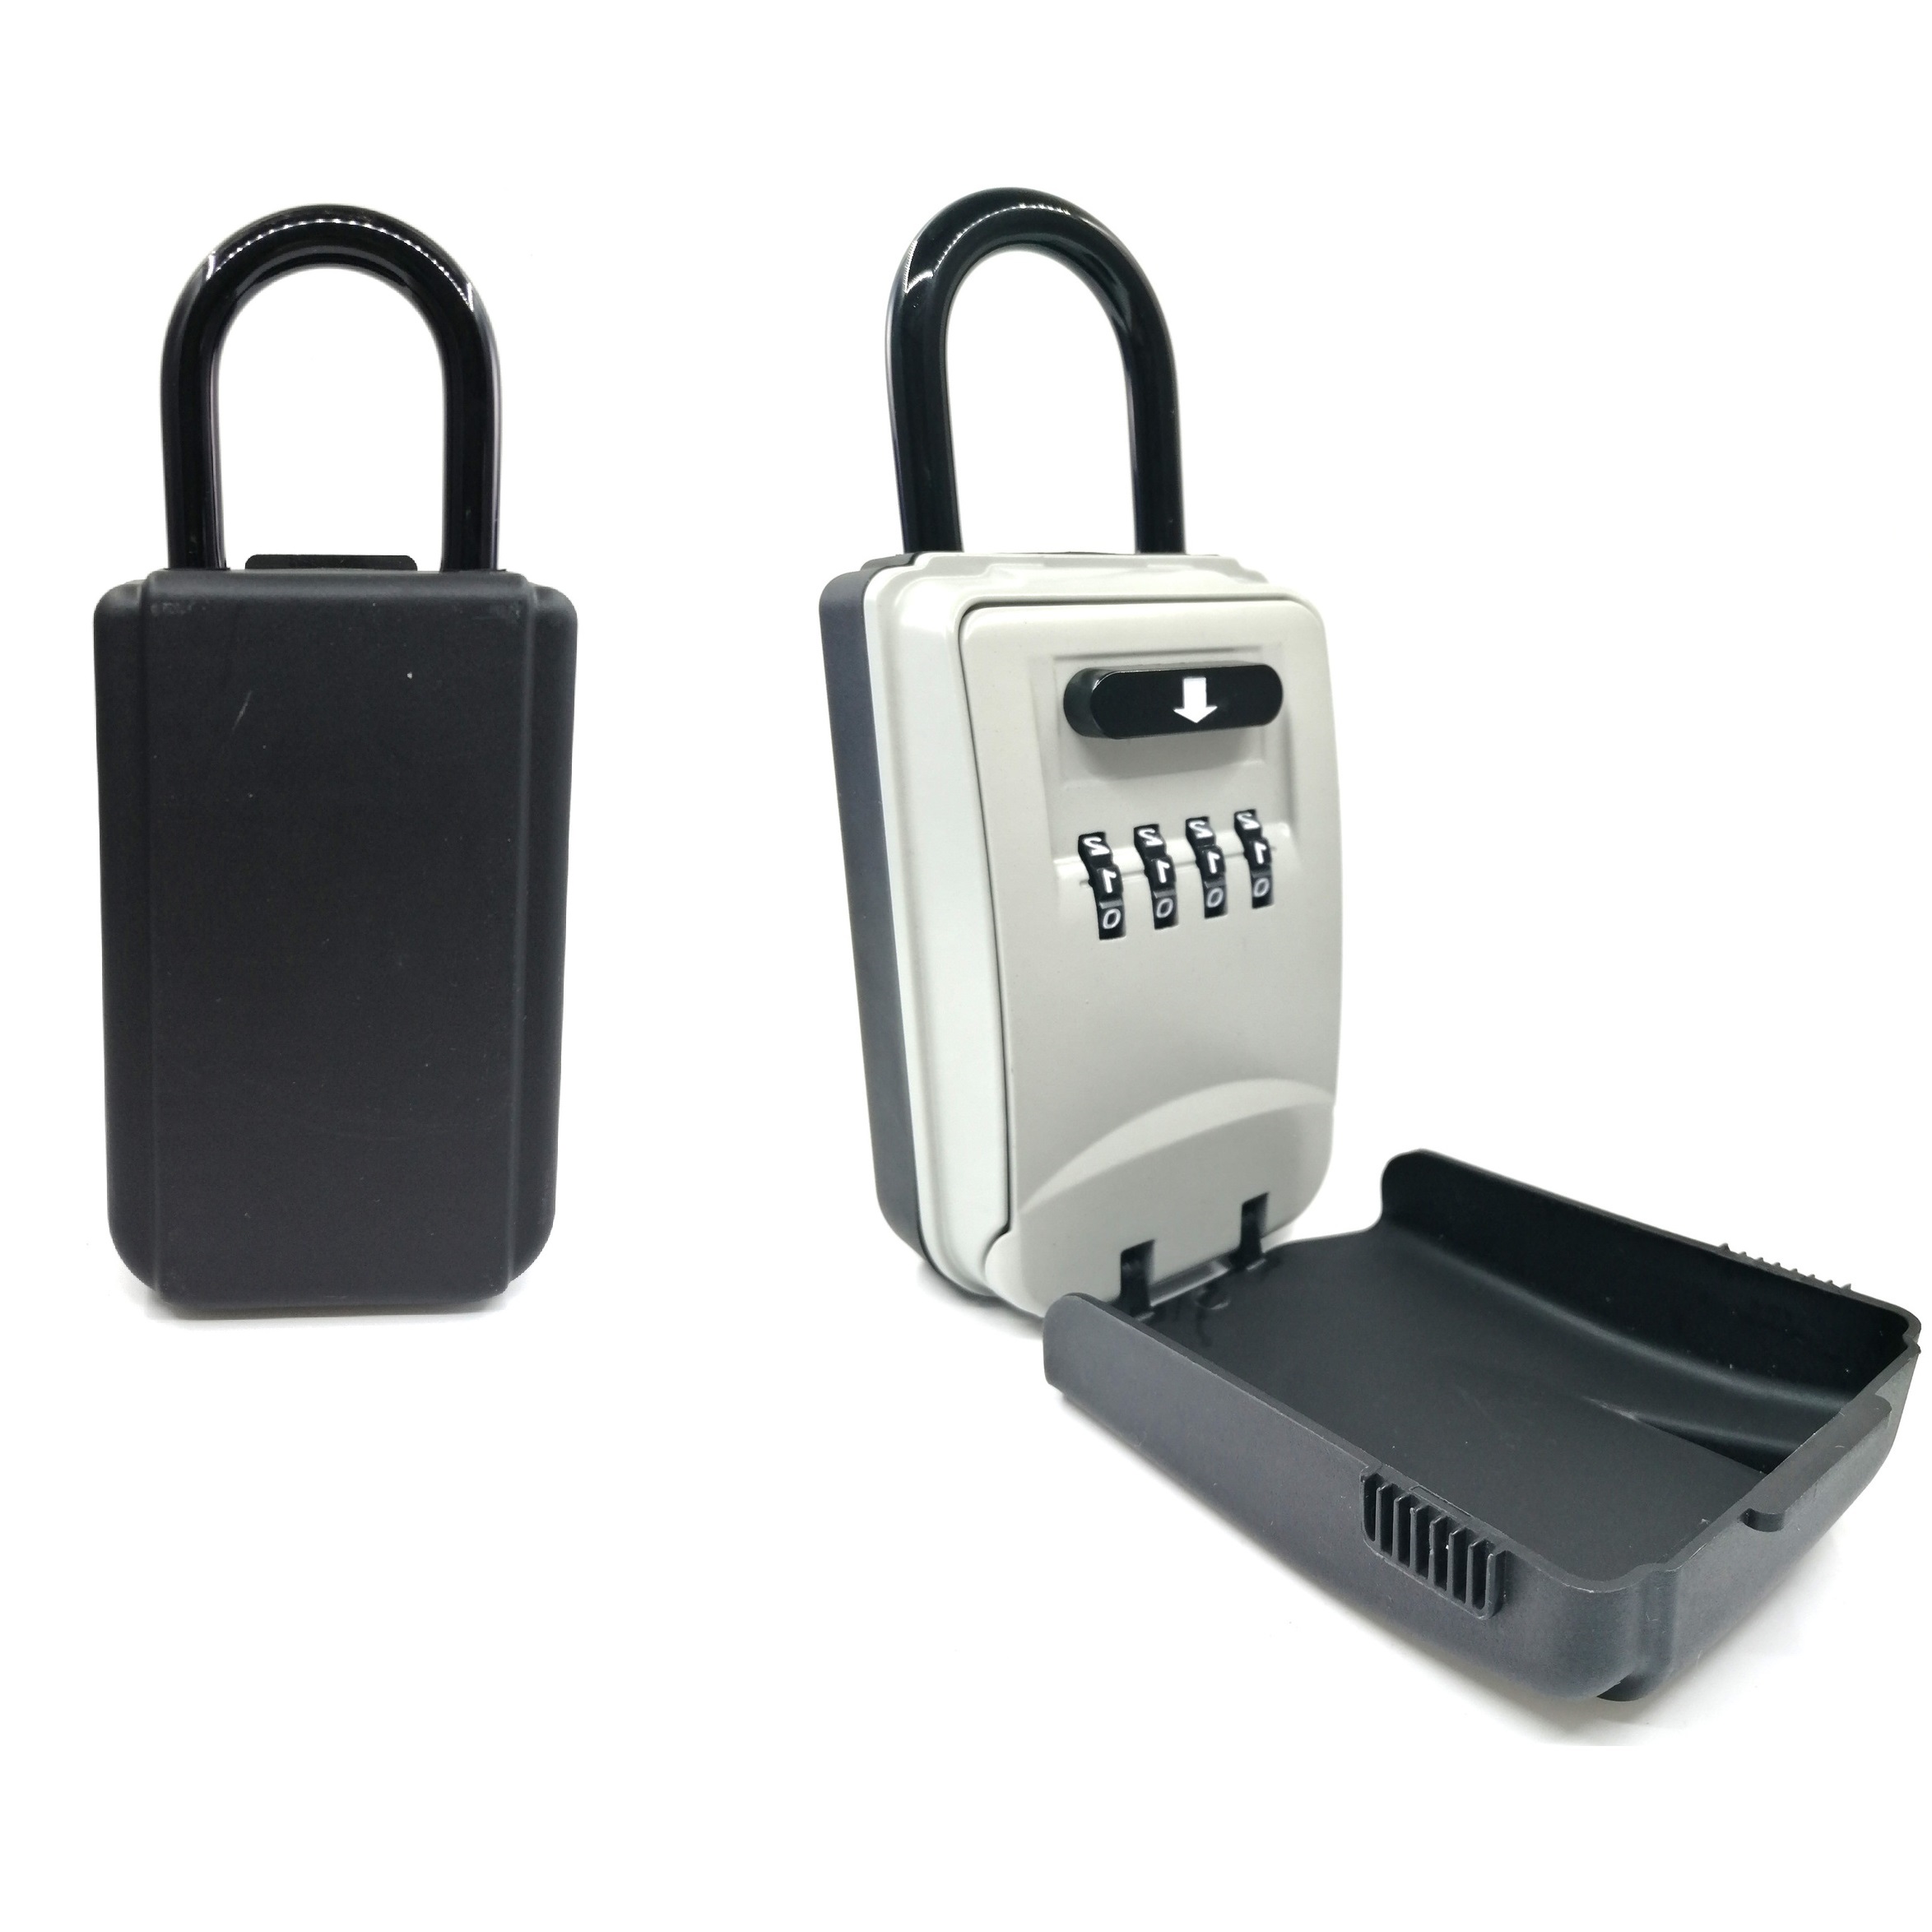 Portable Key Storage Box With Waterproof Cover WS-LB11 Featured Image